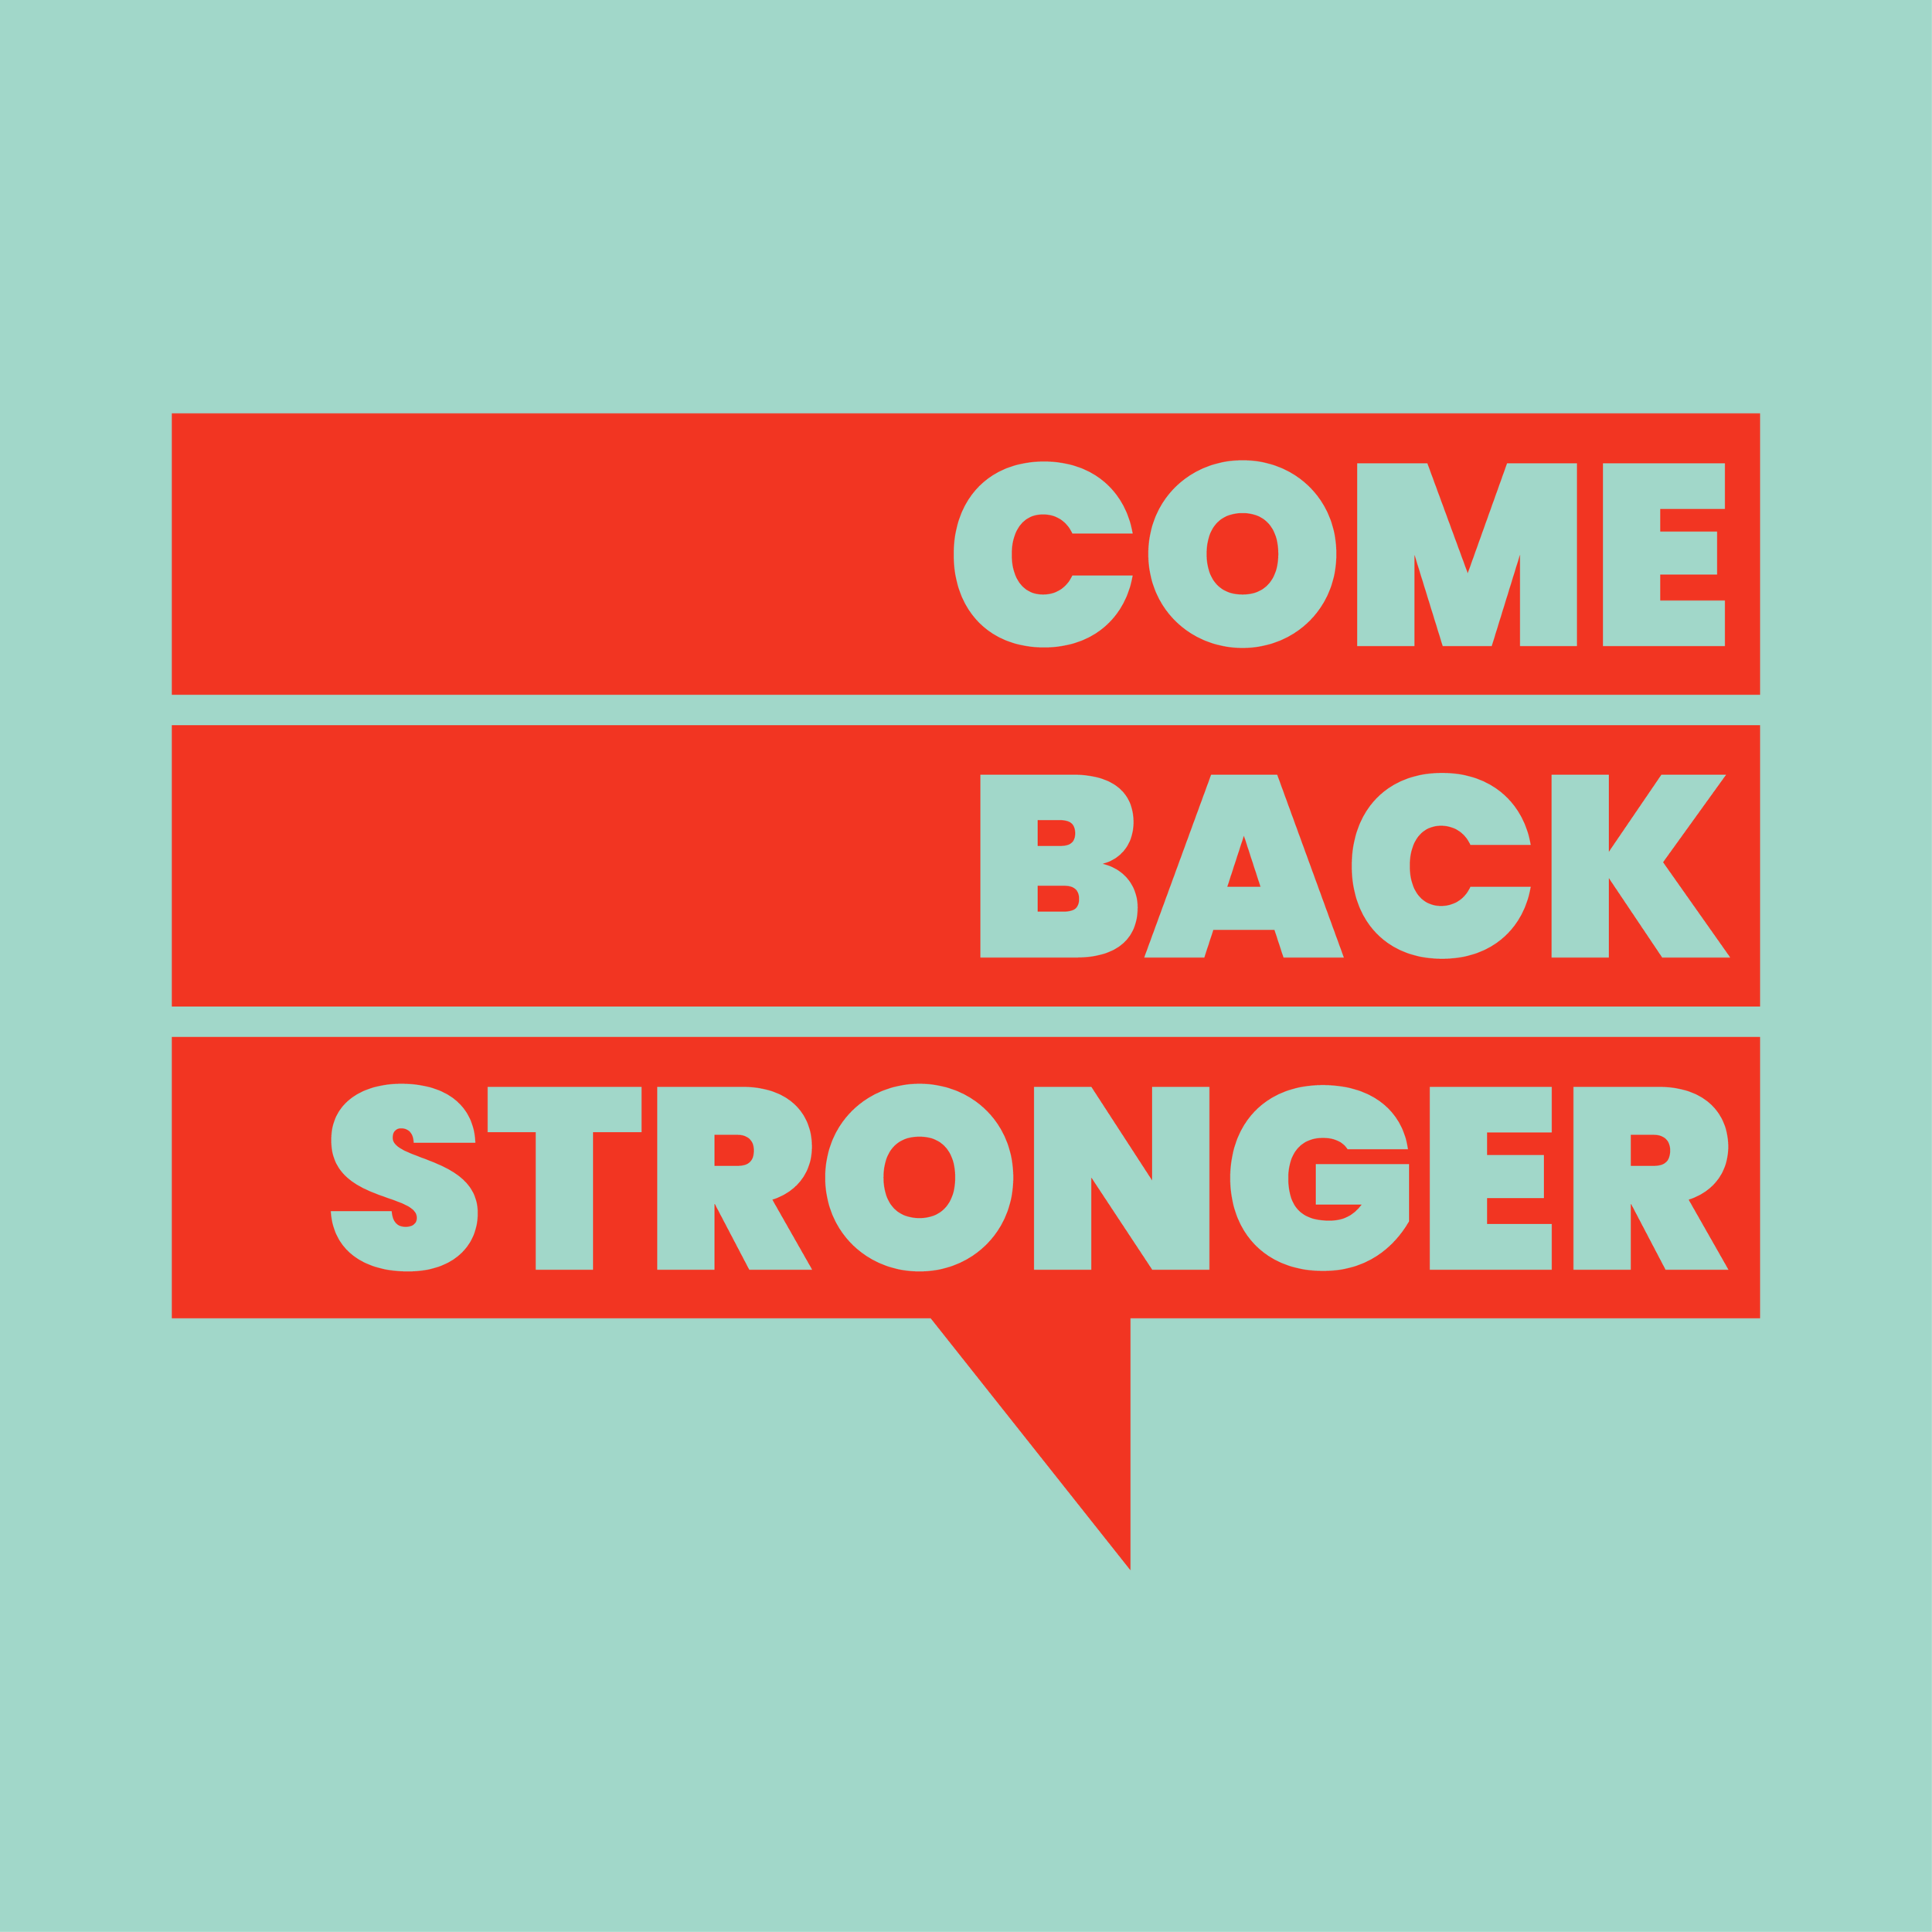 Your come in back. Come back. Comeback картинки. Надпись Comeback. Камбэк надпись.